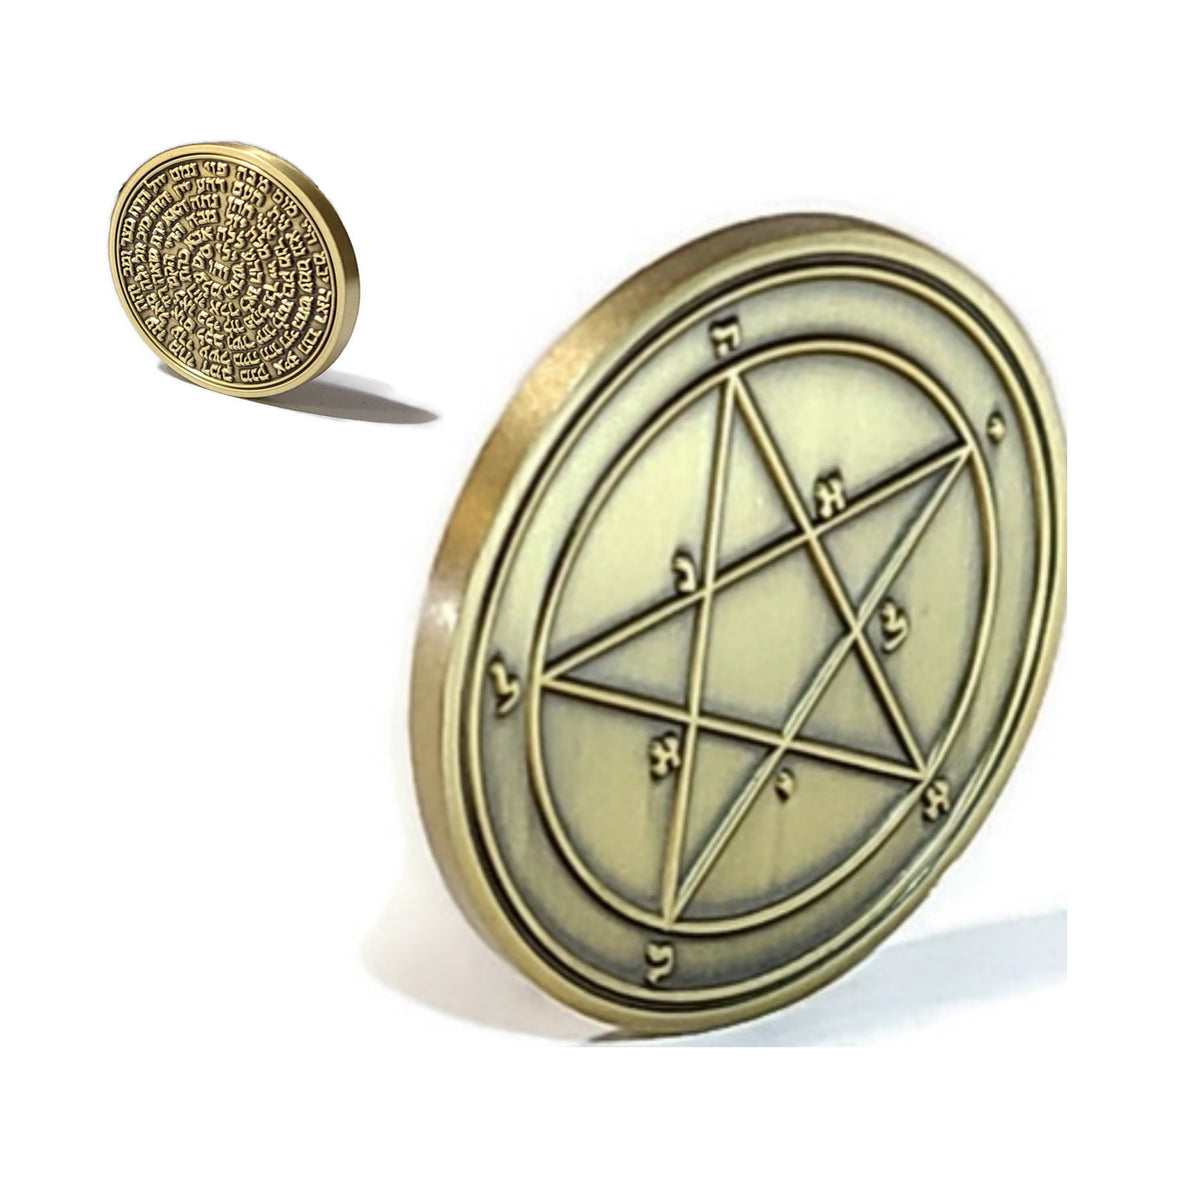 First Pentacle of Mercury + 72 names of God – King Solomon